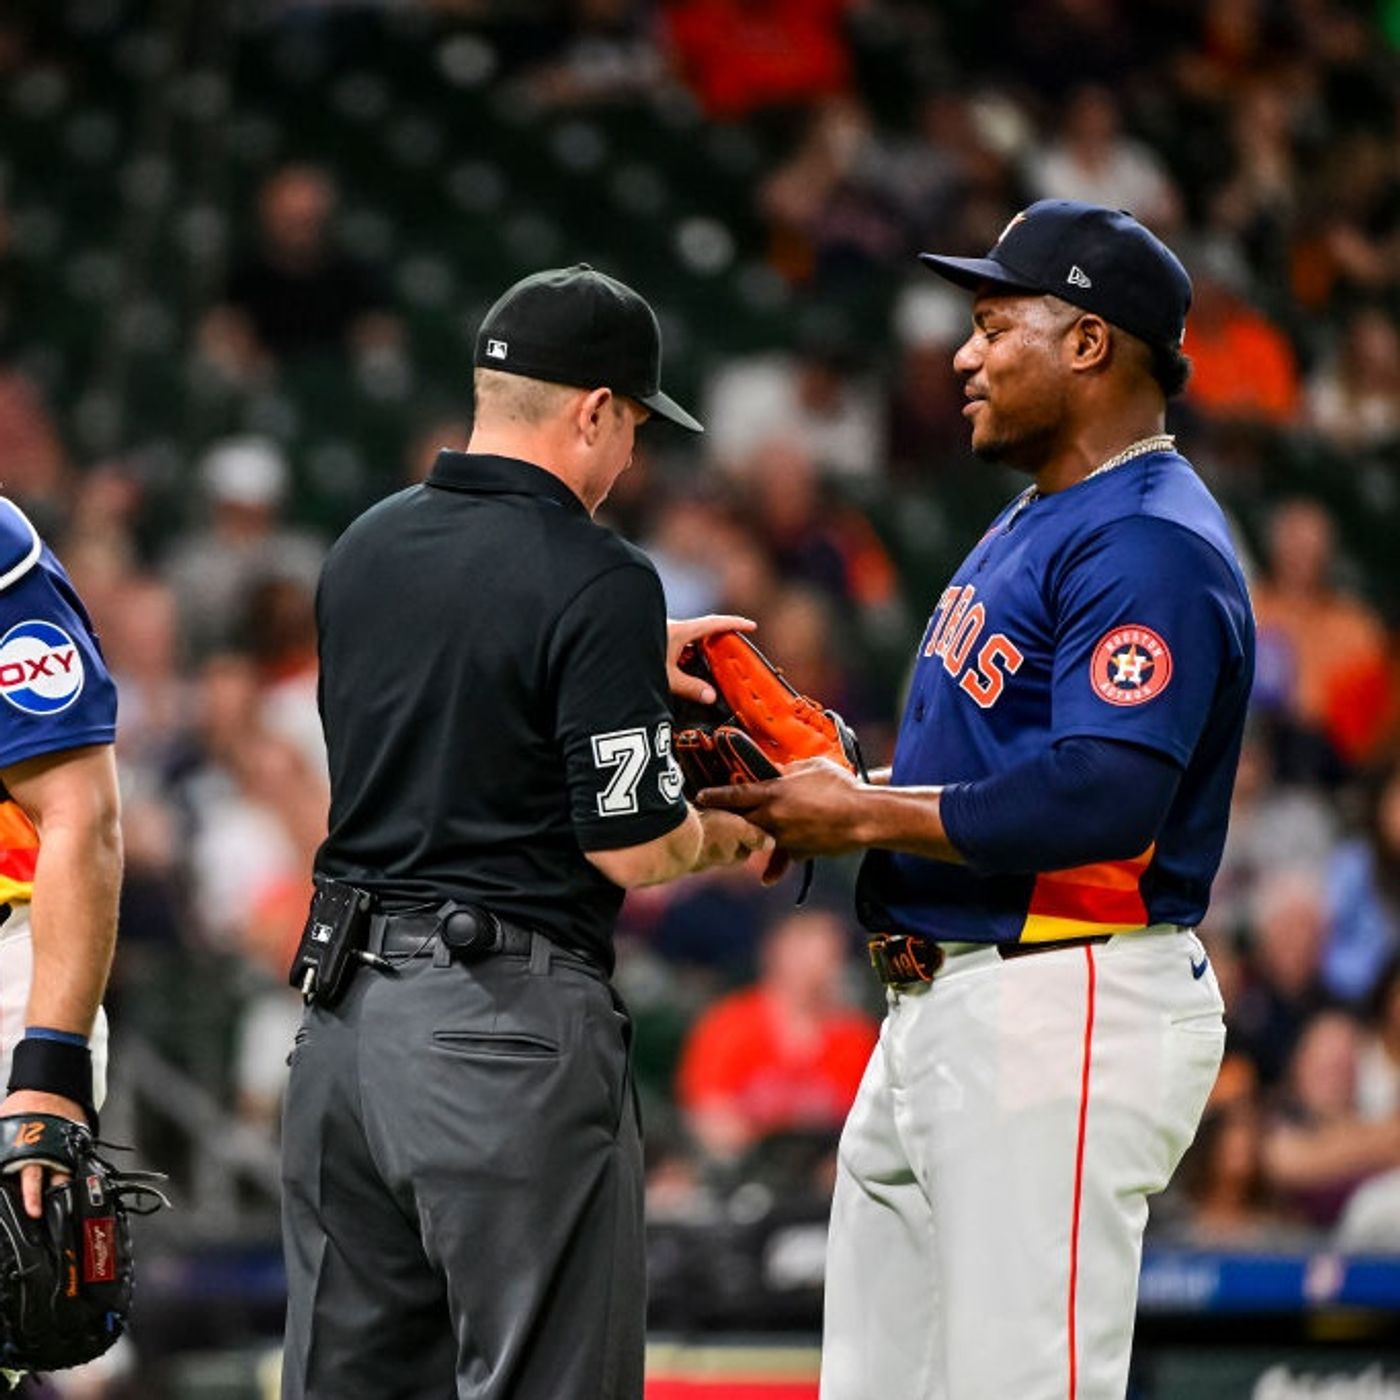 Framber Leads Astros To 4 Straight Wins, Blanco Suspended, Texans Schedule Release